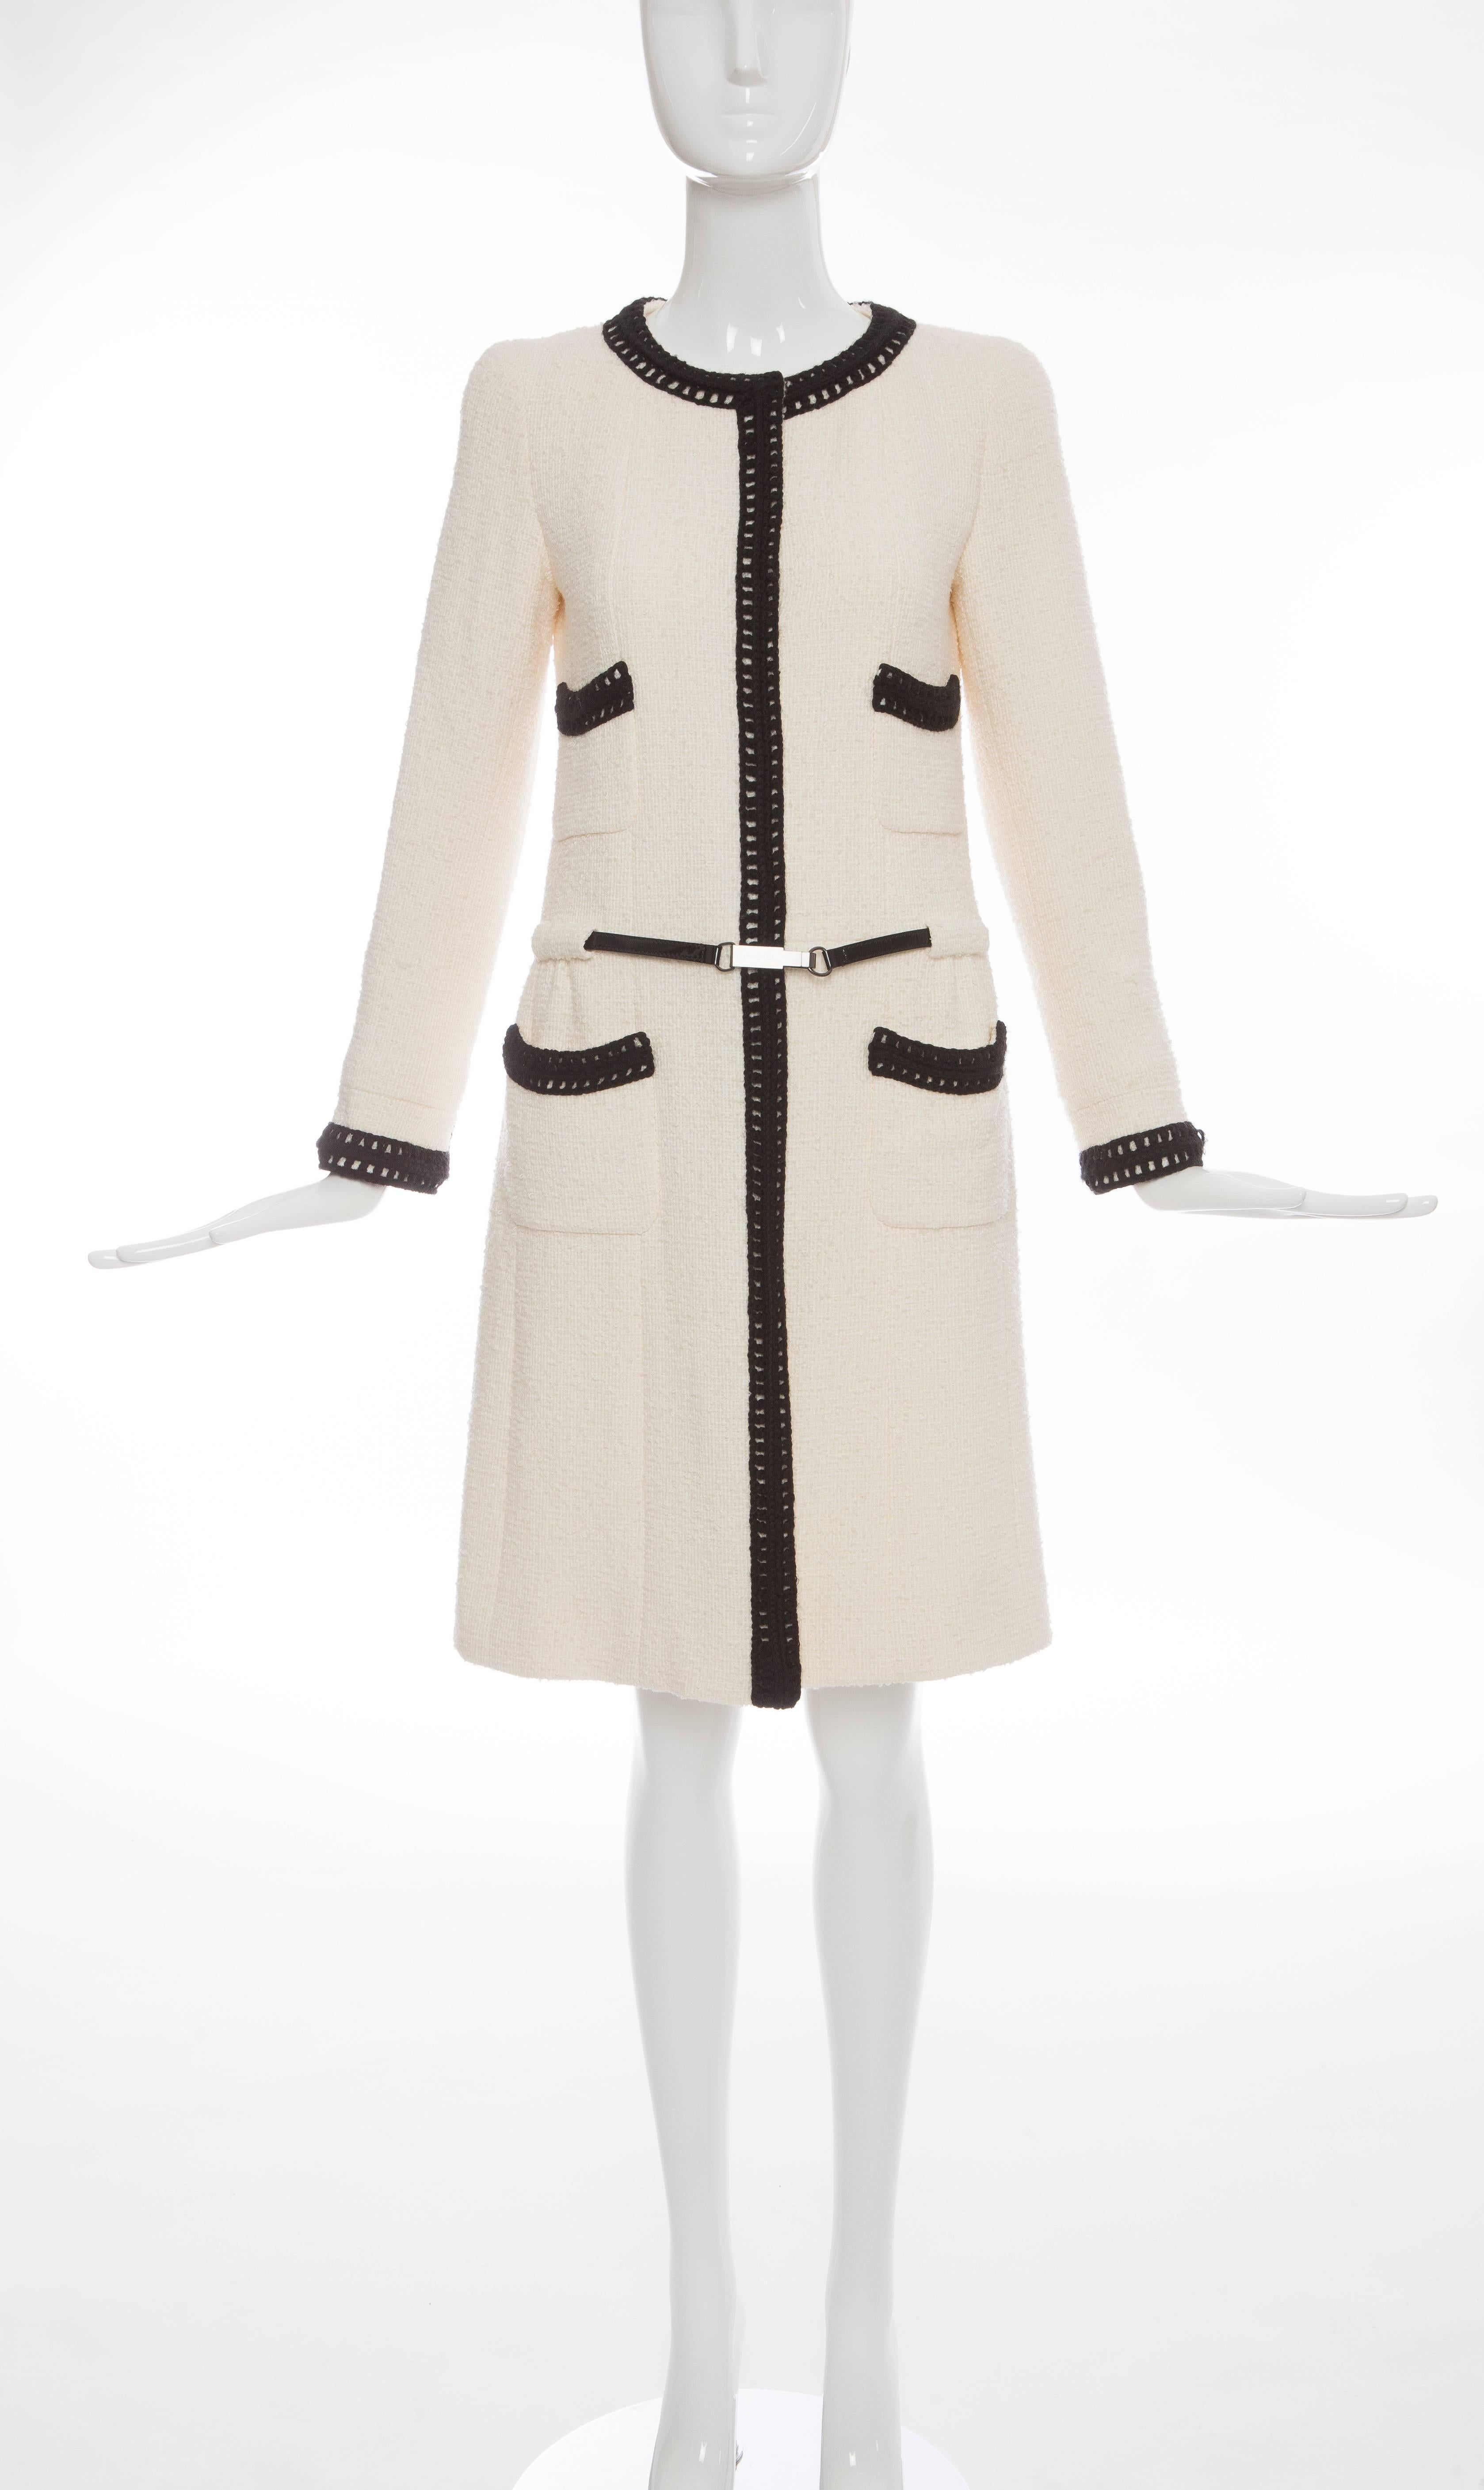 Chanel, Autumn - Winter 2000, white wool coat of alpaca and wool tweed, snap front, four front pockets, black knit trim, black patent belt and fully lined in silk.

This Karl Lagerfeld / Chanel coat is part of the Kyoto Costume Institutes fashion